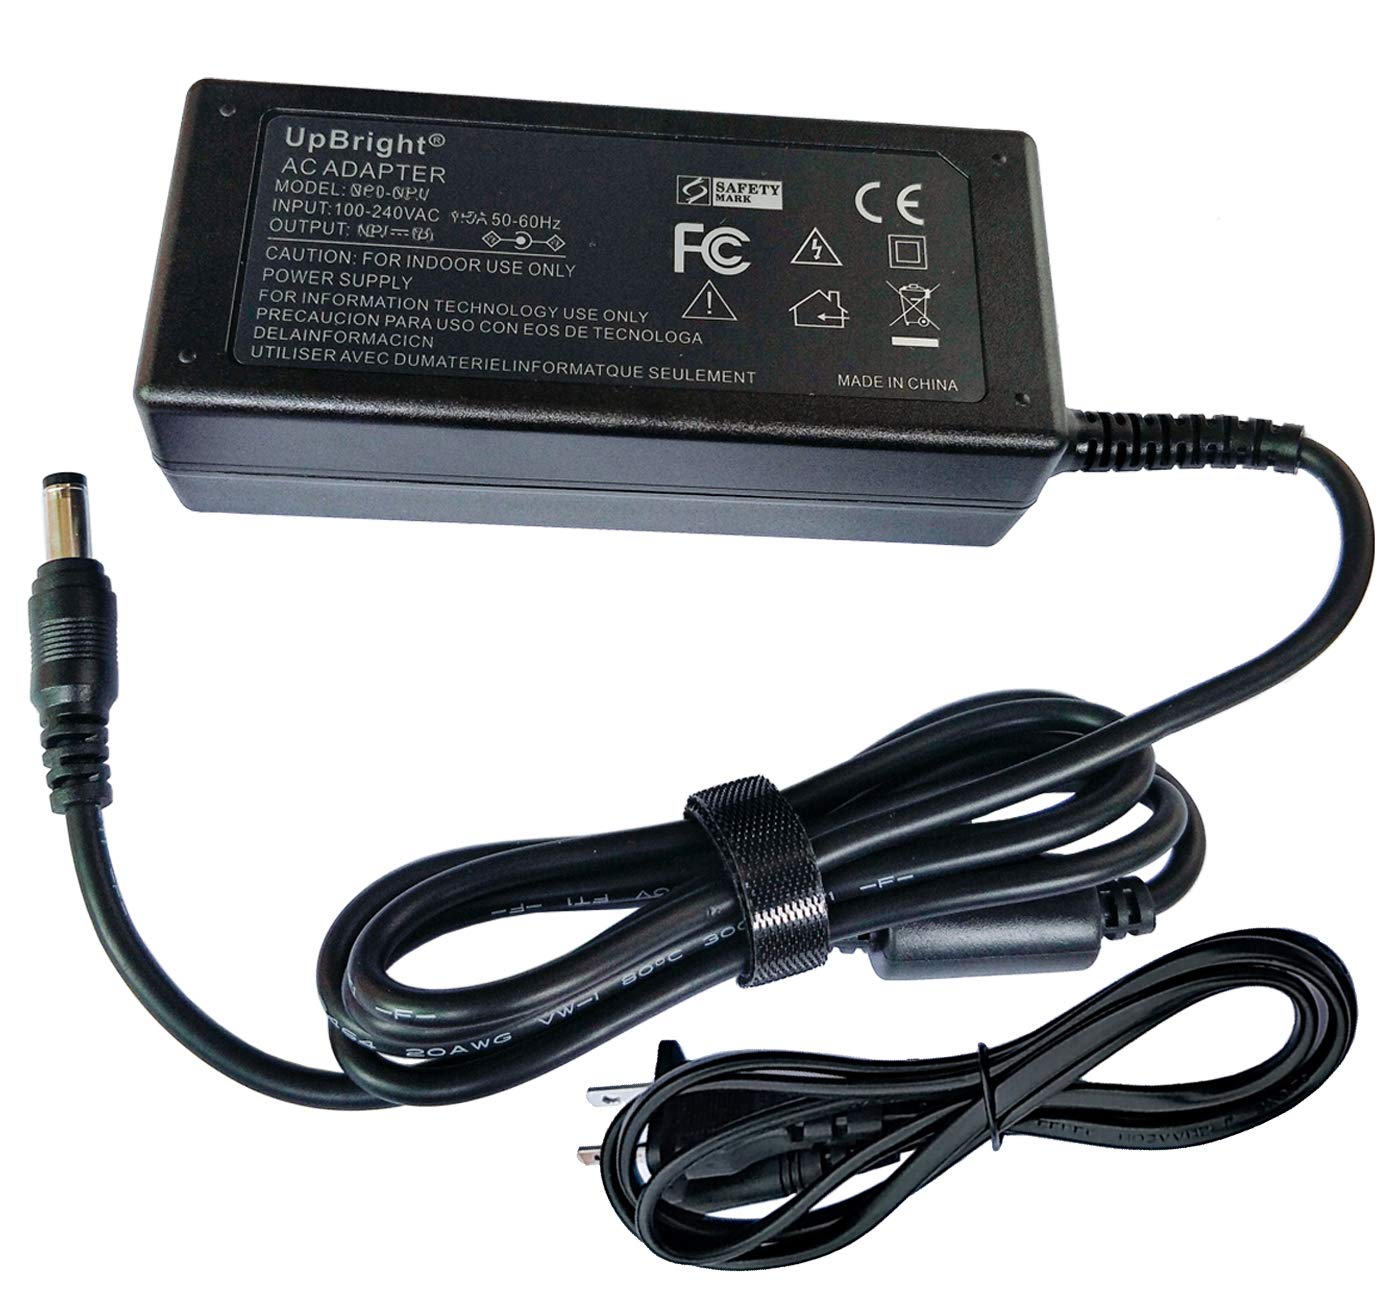 UpBright 15V AC/DC Adapter Compatible with Tenergy T320 59148 59148-01 59148-02 Portable Power Station 300Wh Backup Lithium Battery Solar Generator 15VDC 3A Power Supply Cord Cable Charger Mains PSU